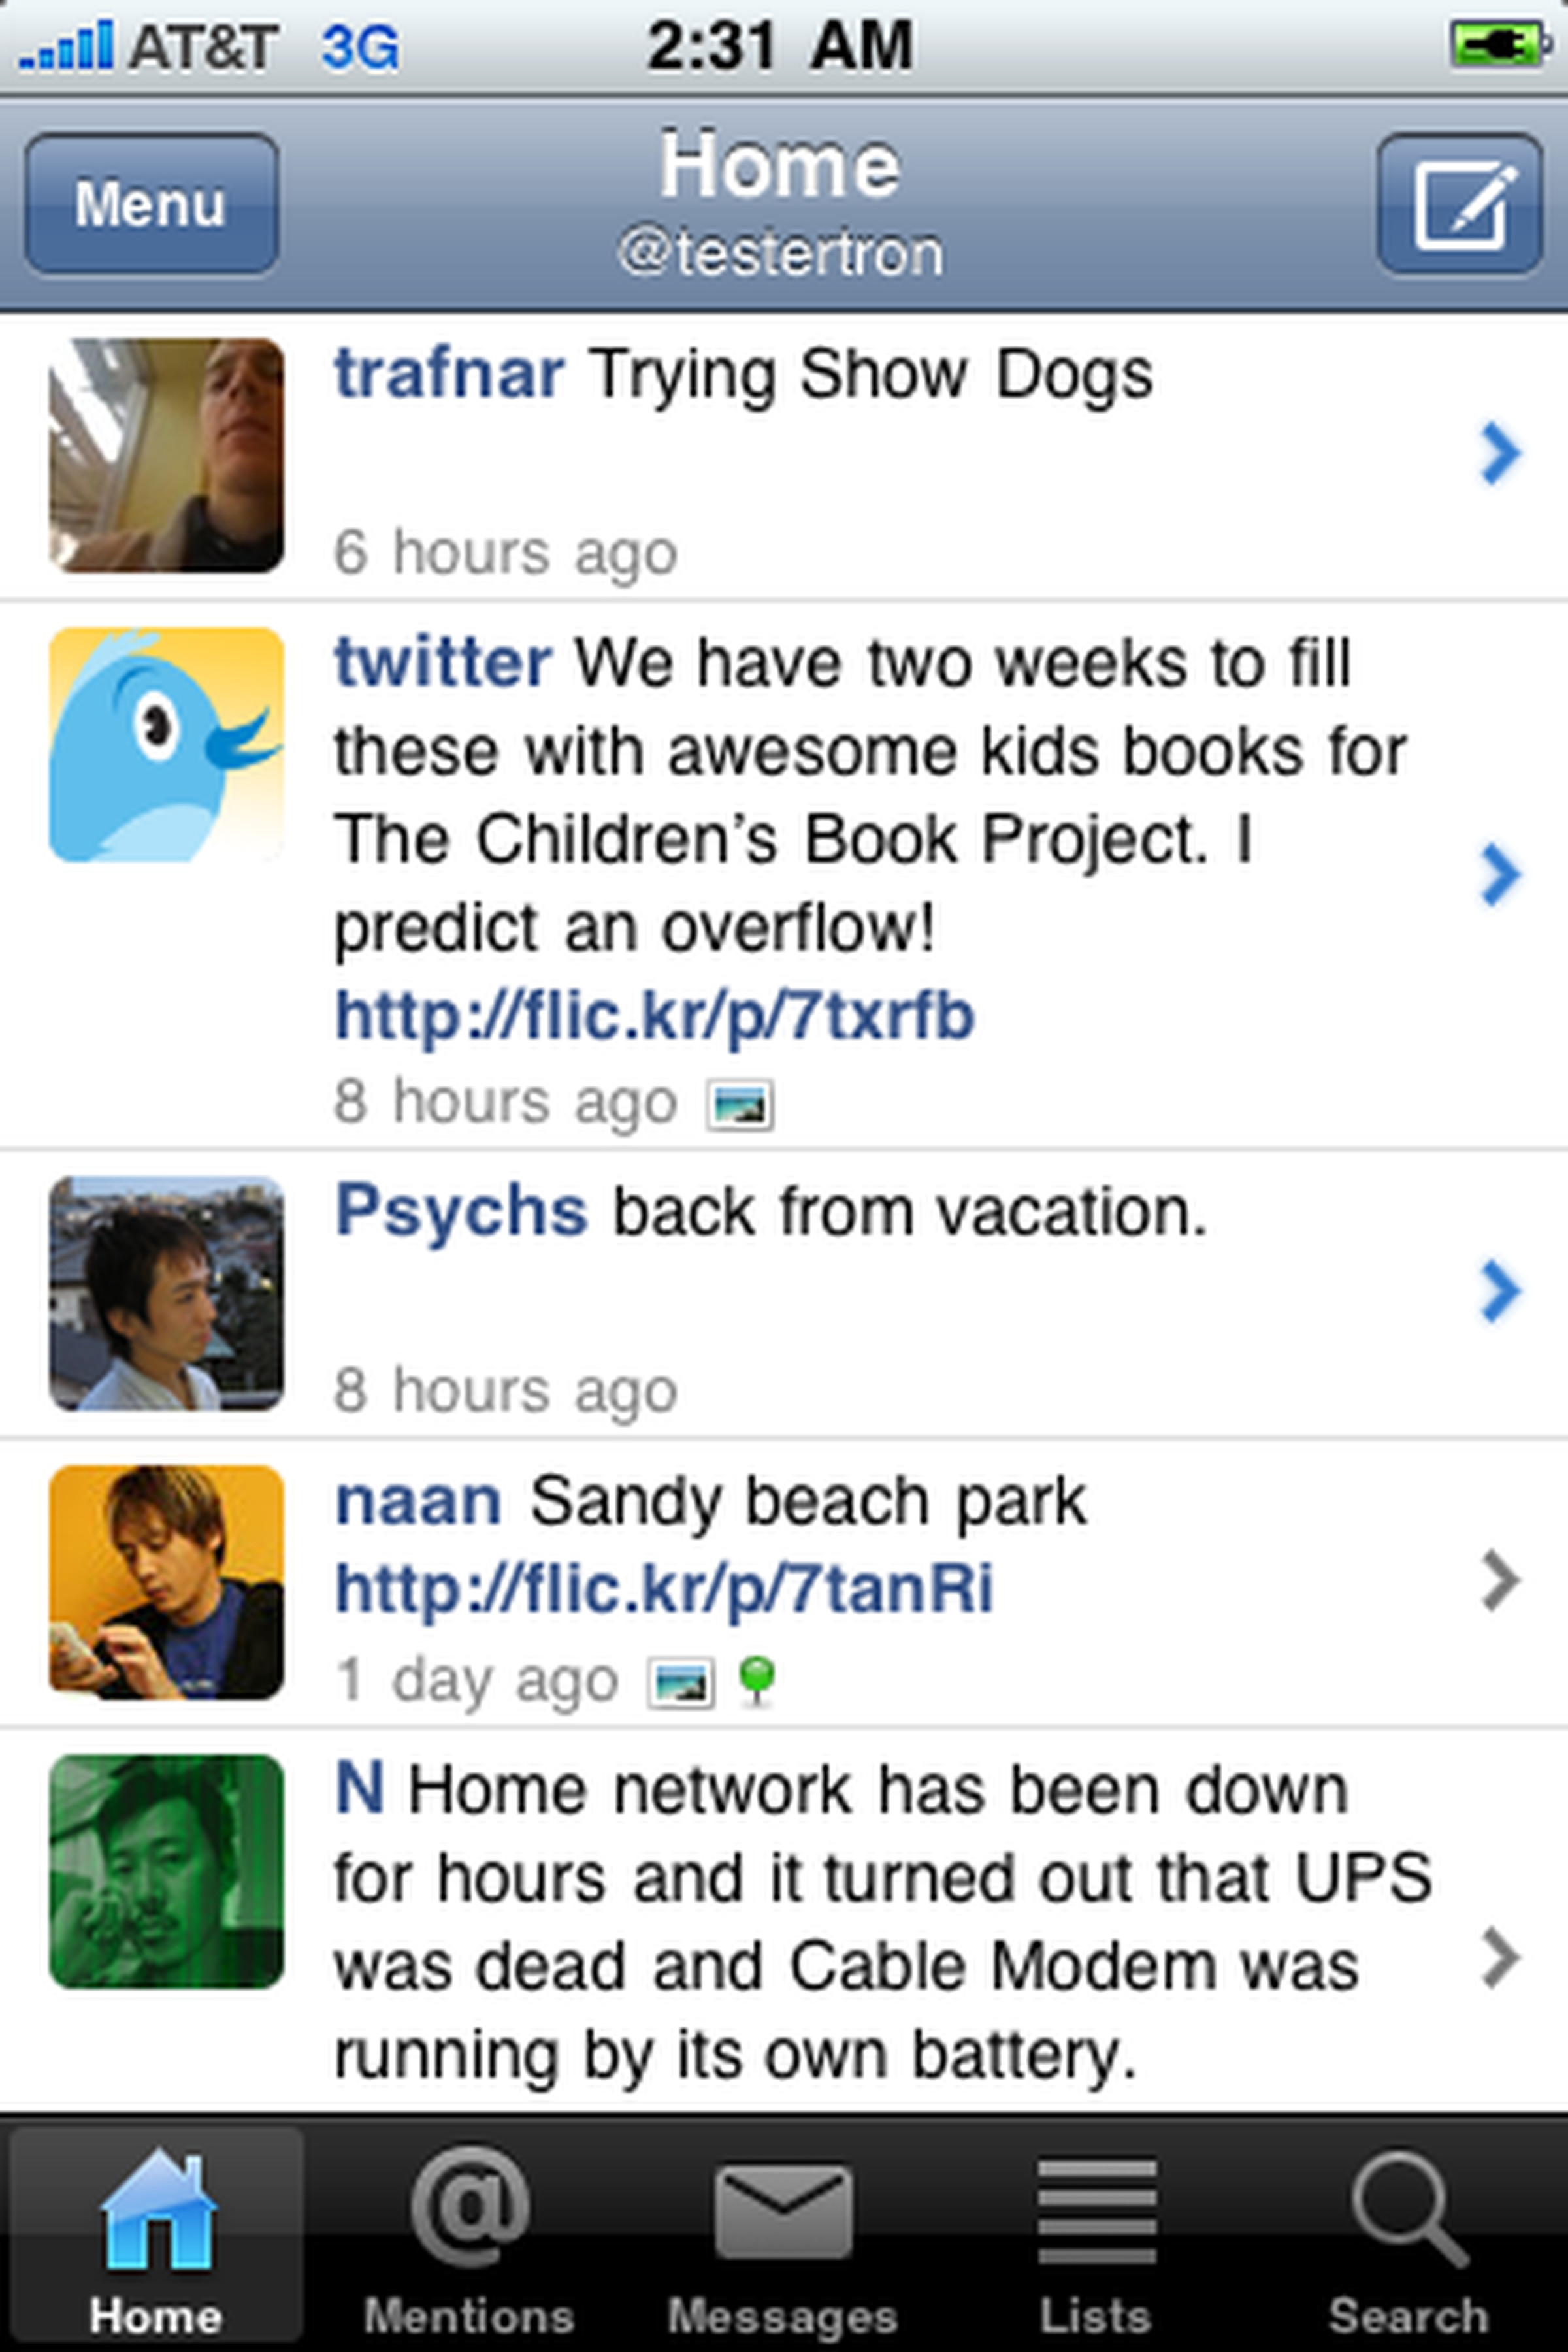 A screenshot of the Echofon Twitter app showing the timeline view.